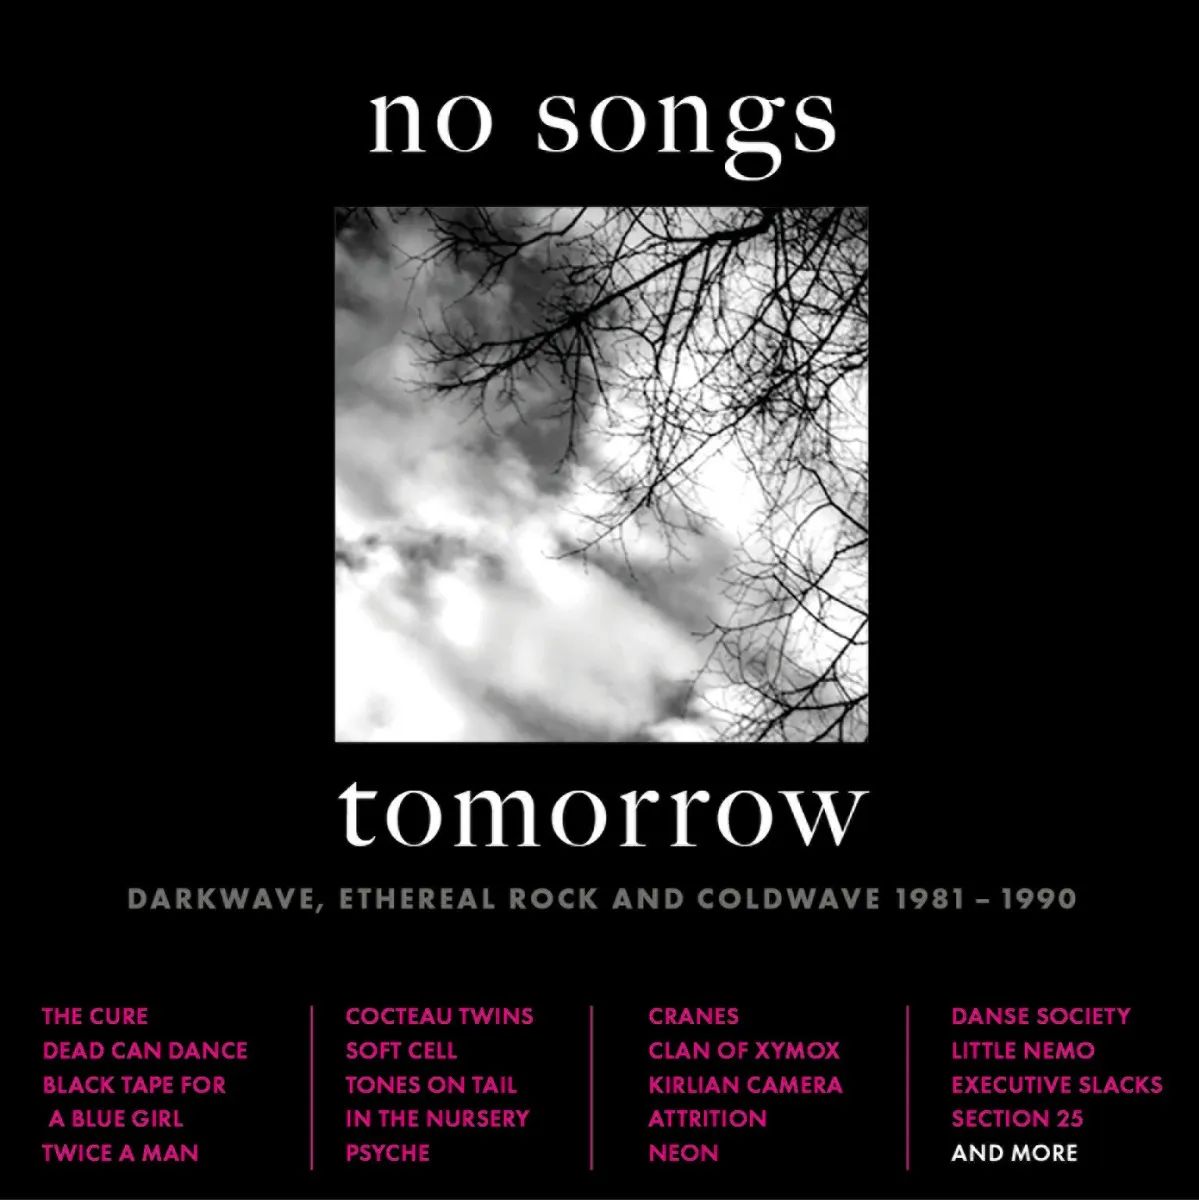 V.A. (NEW WAVE/POST PUNK/NO WAVE) / NO SONGS TOMORROW - DARKWAVE, ETHEREAL ROCK AND COLDWAVE 1981-1990 4CD CLAMSHELL BOX